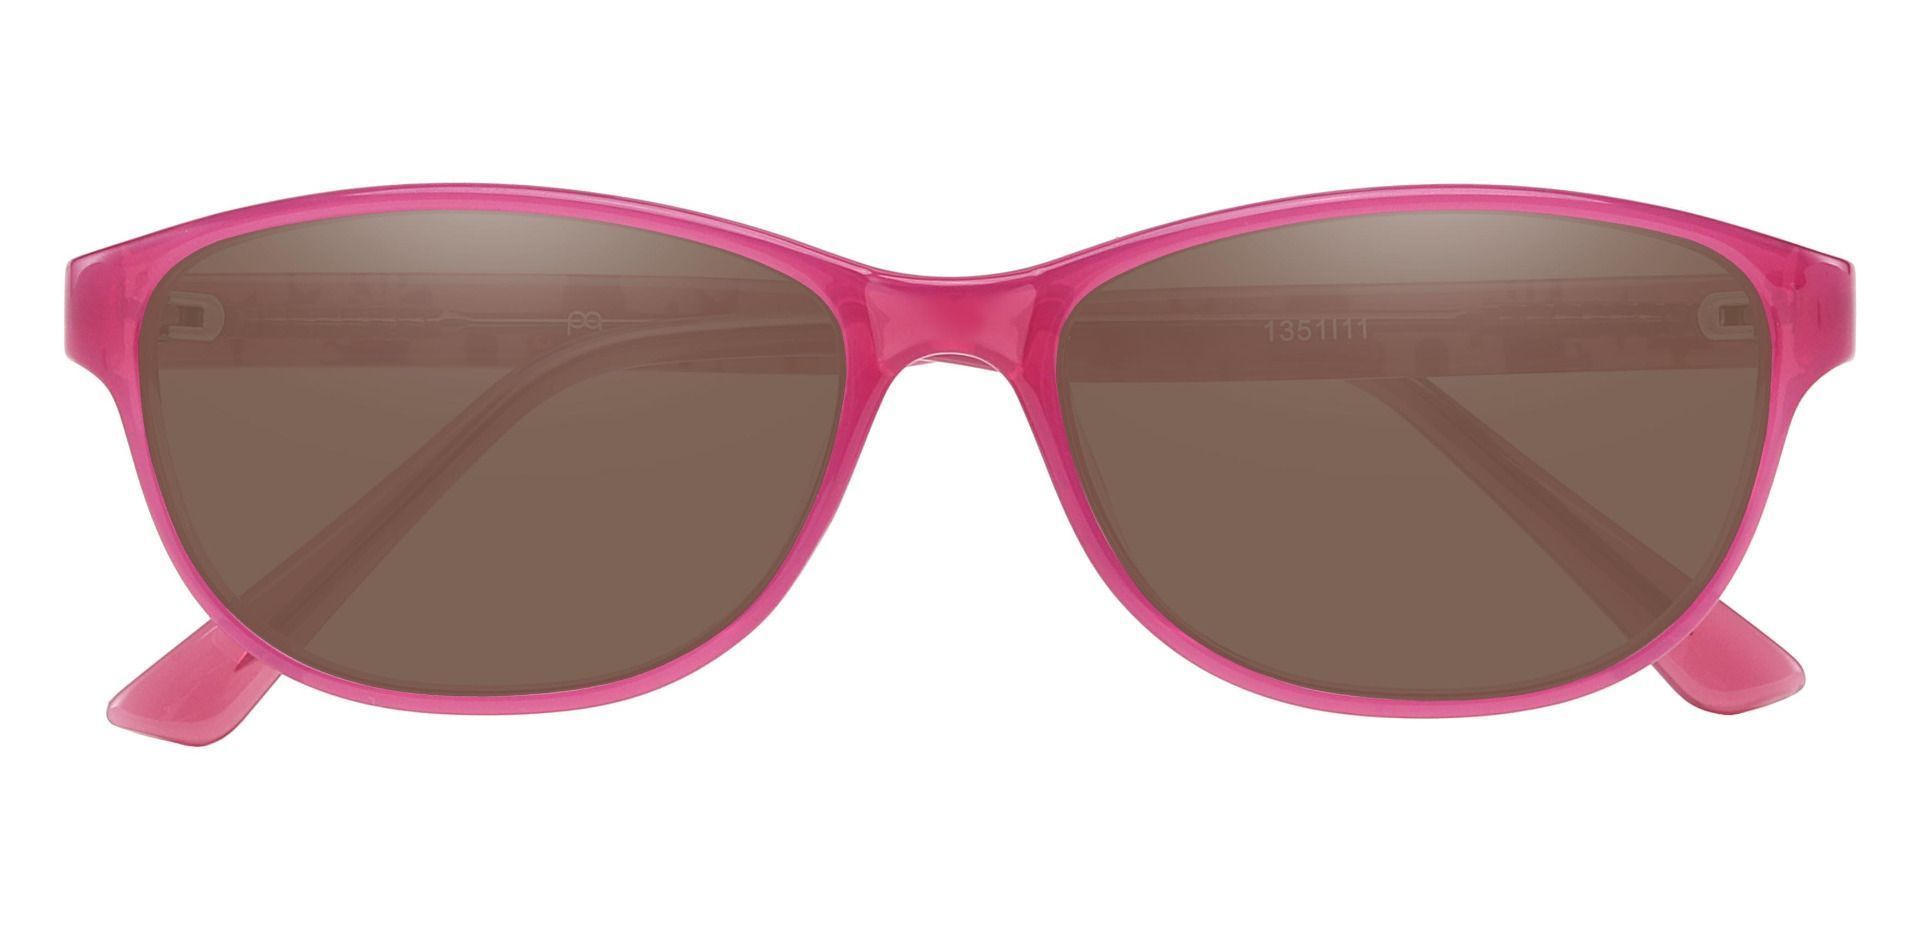 Patsy Oval Progressive Sunglasses - Pink Frame With Brown Lenses